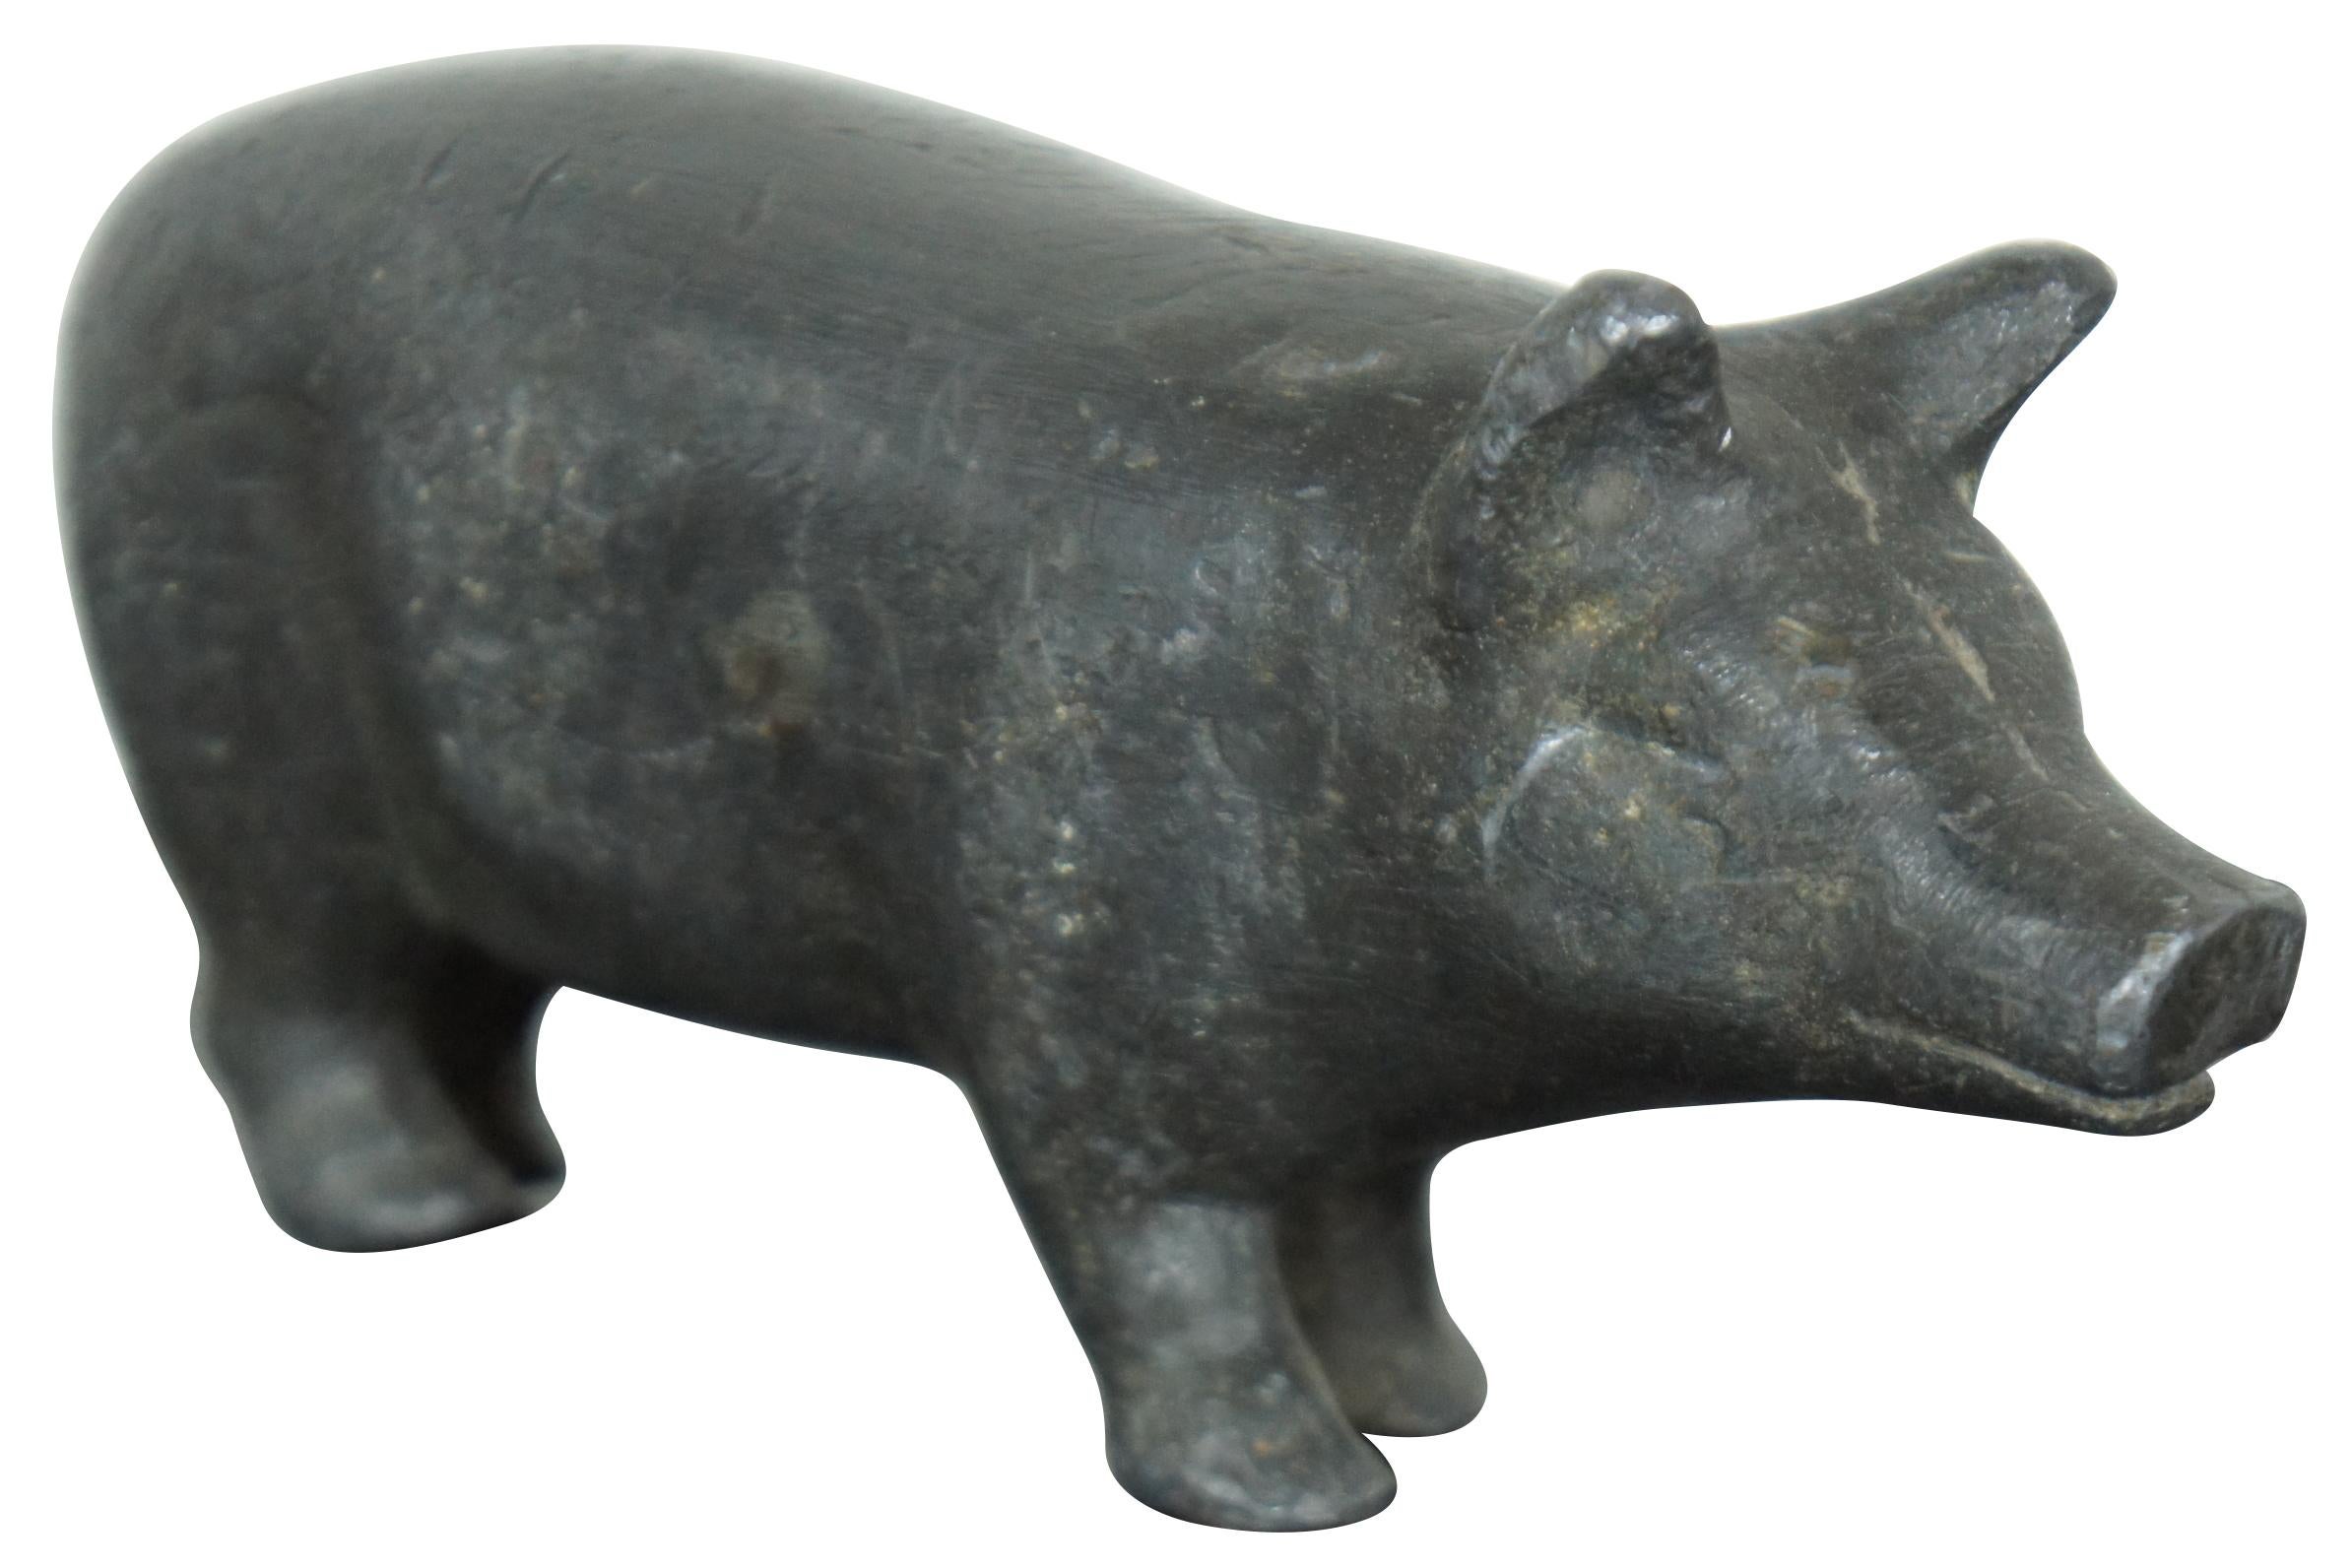 Very solid and heavy cast lead figurine or paperweight in the shape of a pig.